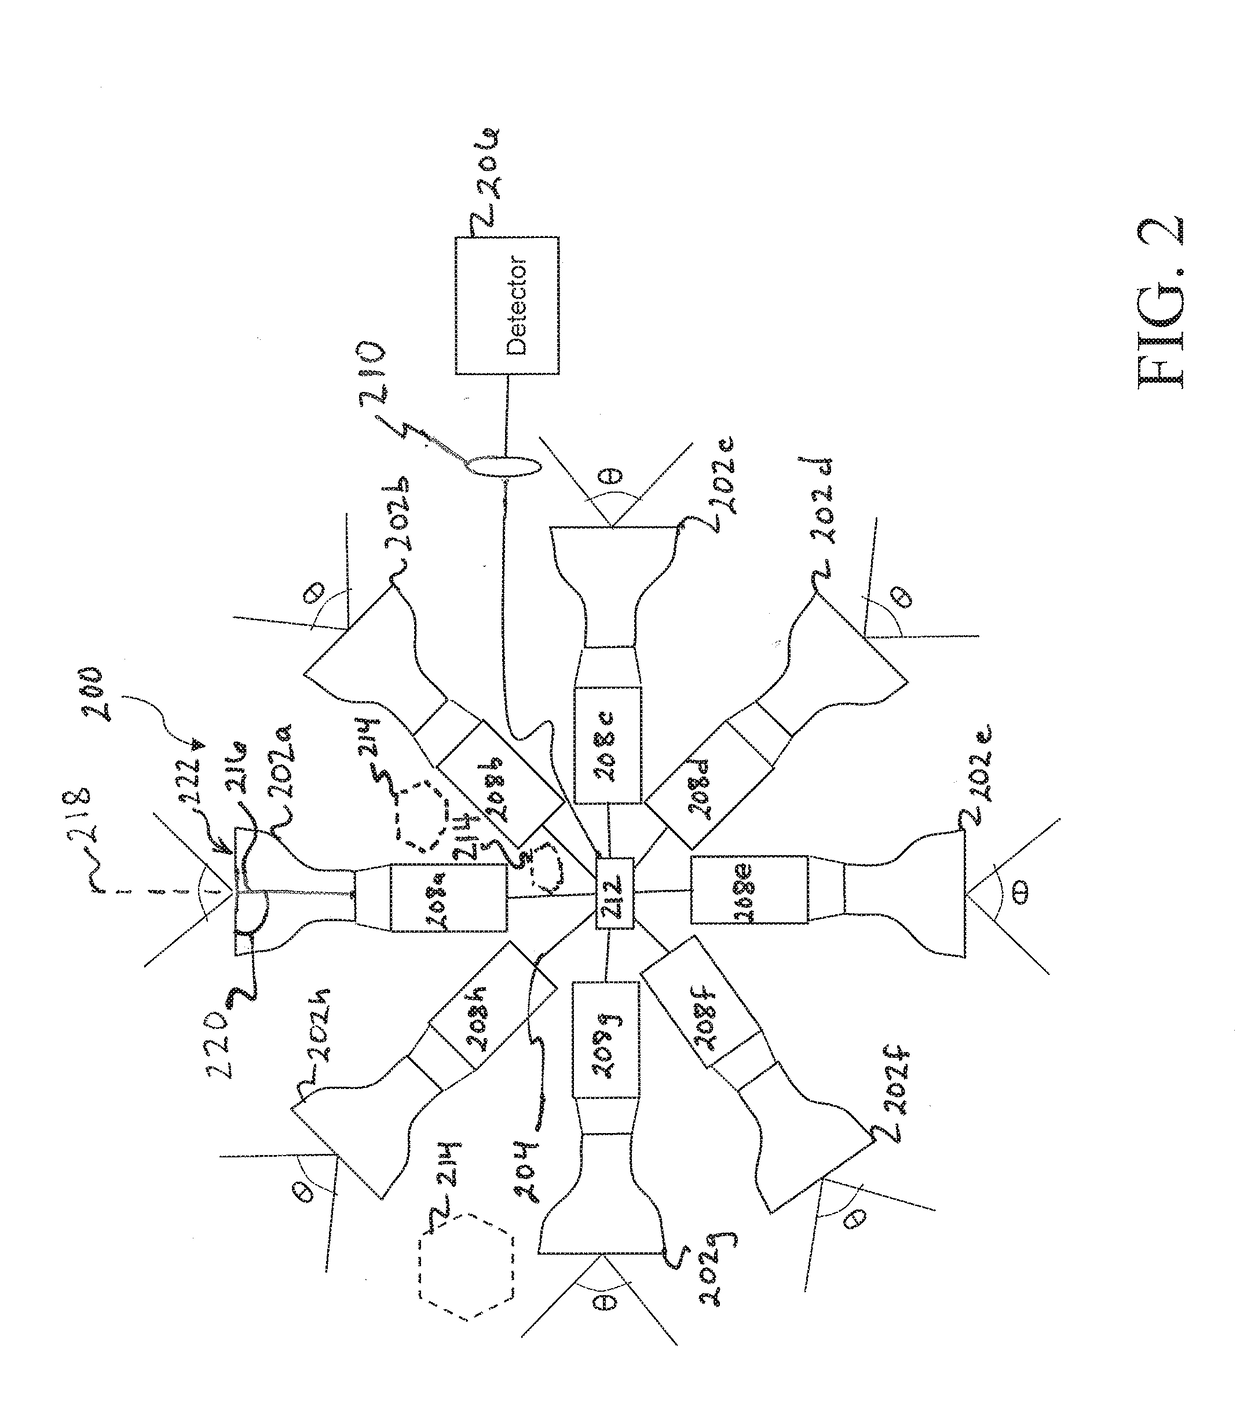 Multi-directional optical receiver and method